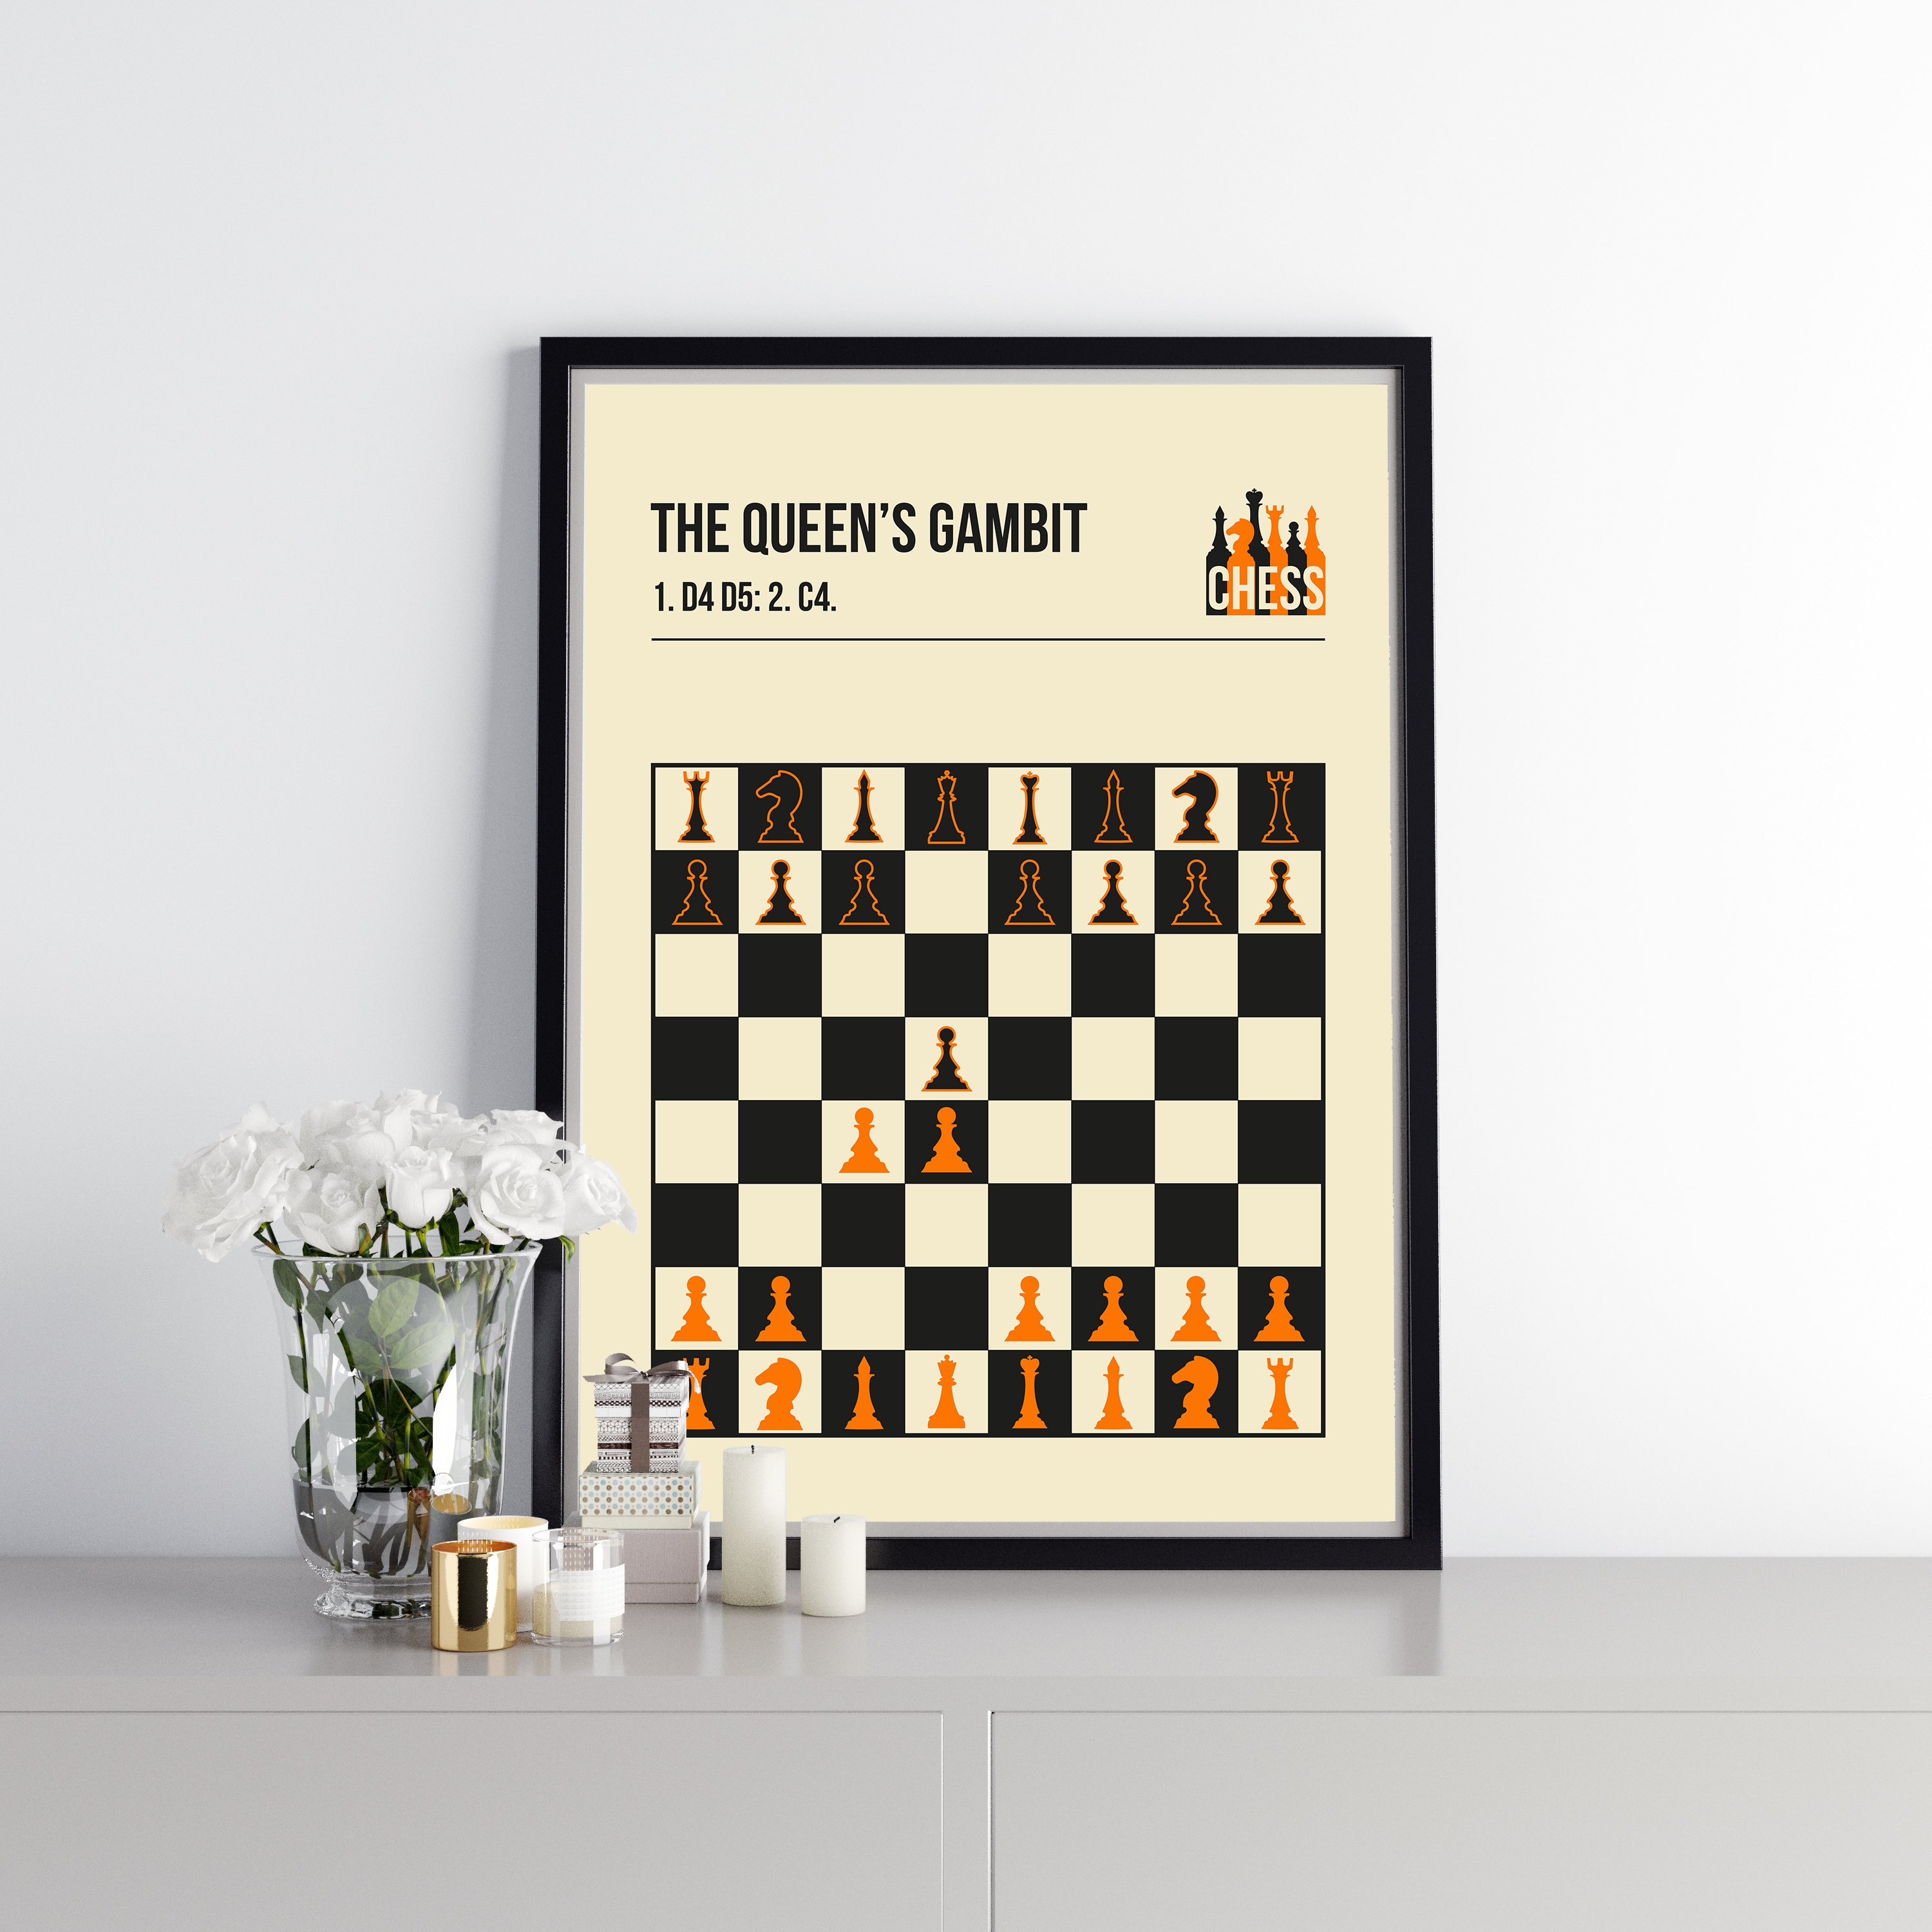 The Sicilian Defense Chess Opening Book Cover Poster Framed Canvas by Jorn